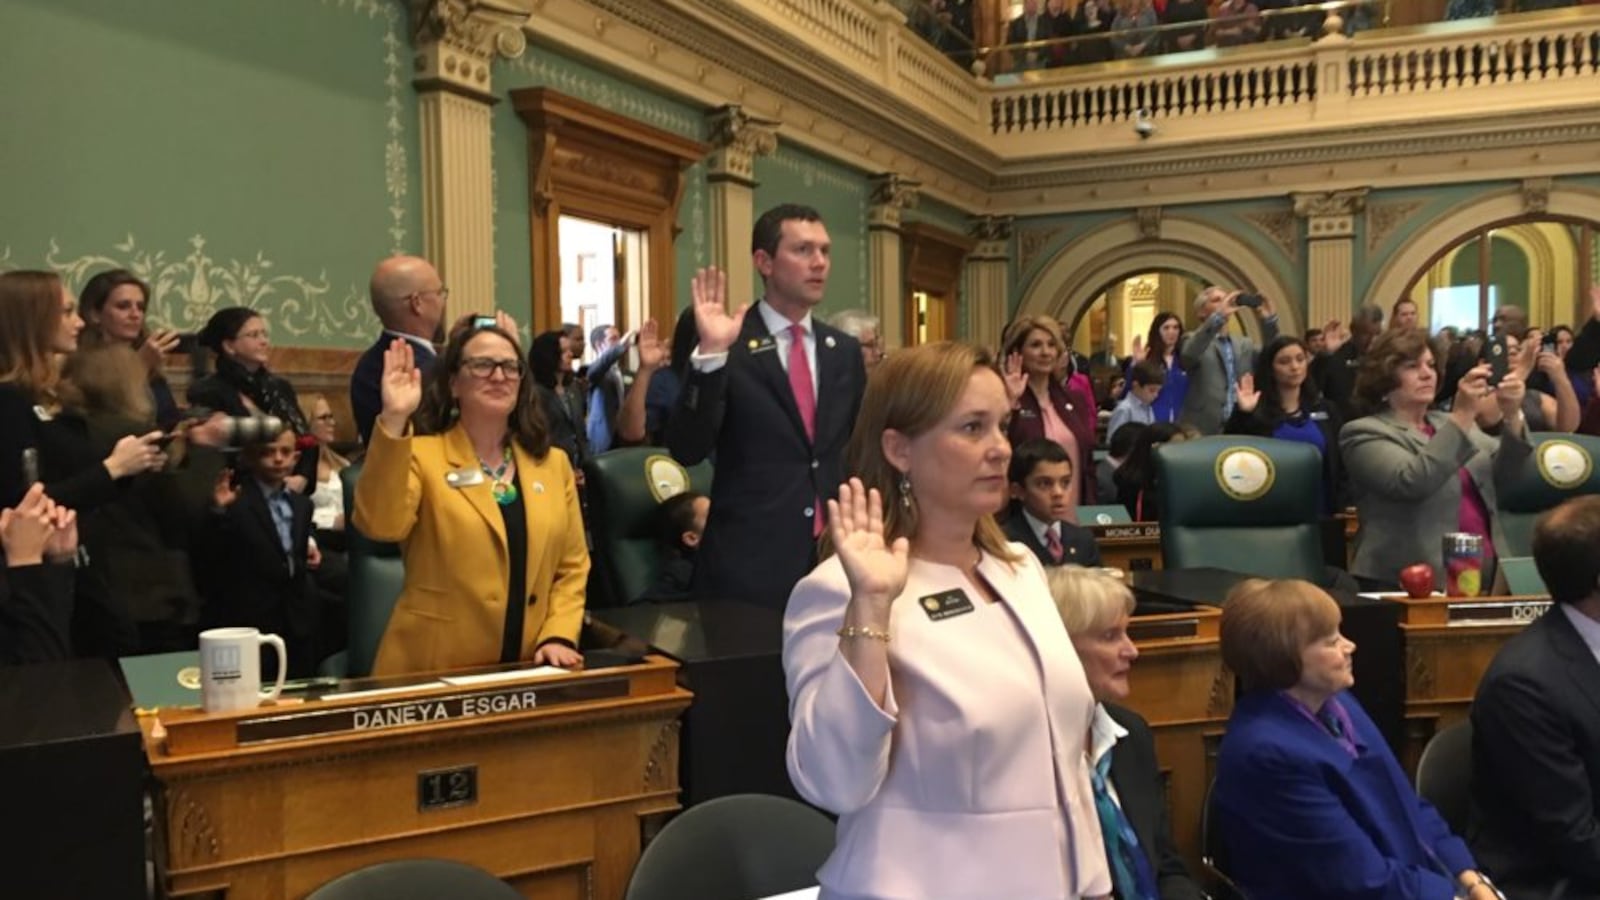 Speaker of the House K.C. Becker is sworn in on the first day of the 2019 Colorado legislative session.